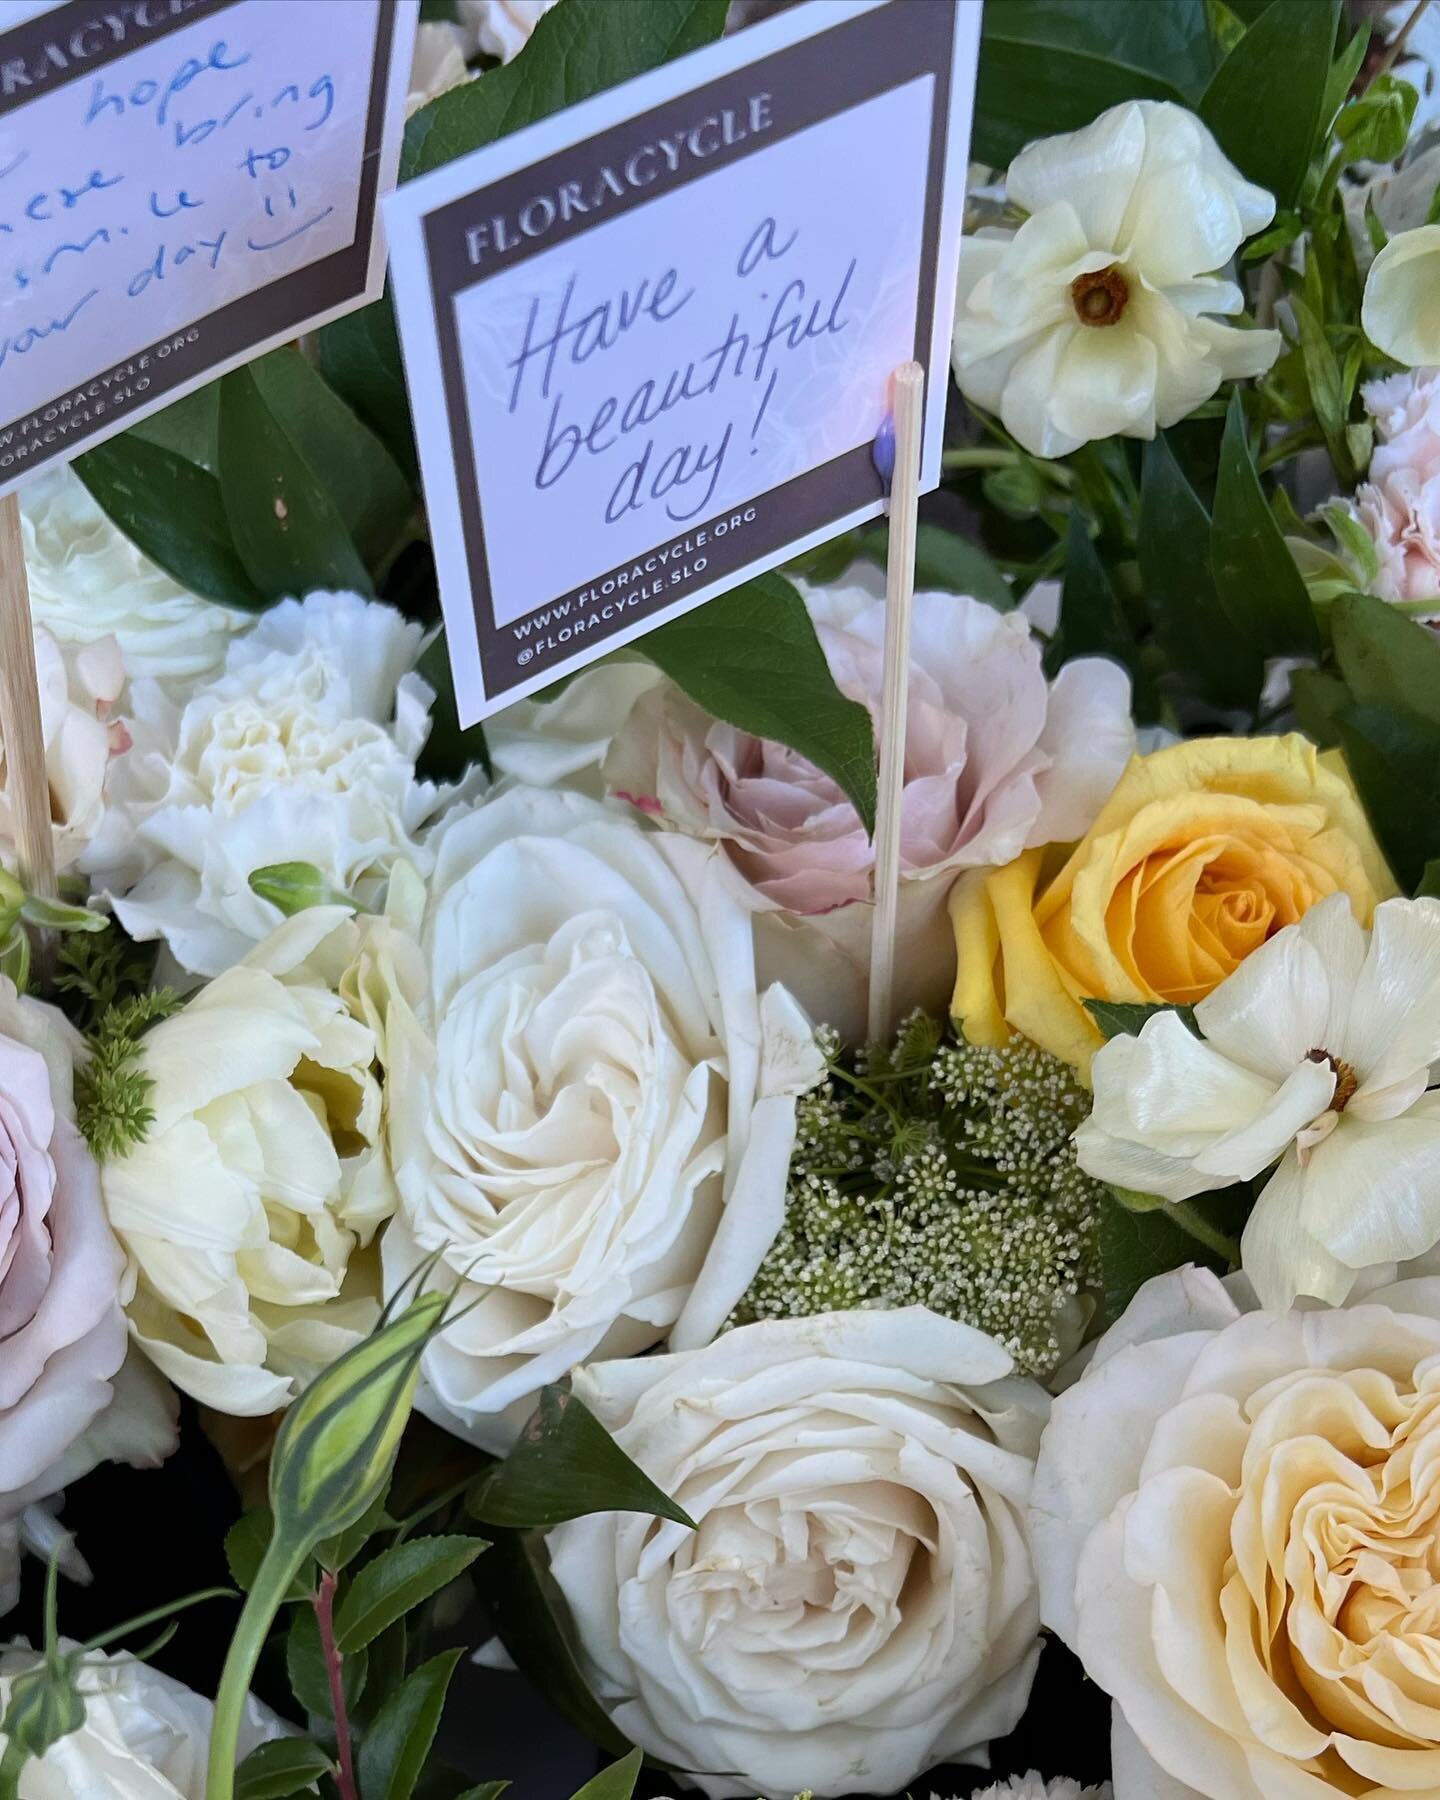 These sweet blooms transformed into 30 lovely arrangements that are cheering up the morning at facilities all over town! 💛

We&rsquo;re thankful that these generous newlyweds were willing to donate such a lovely palette of flowers from @maunaflorist